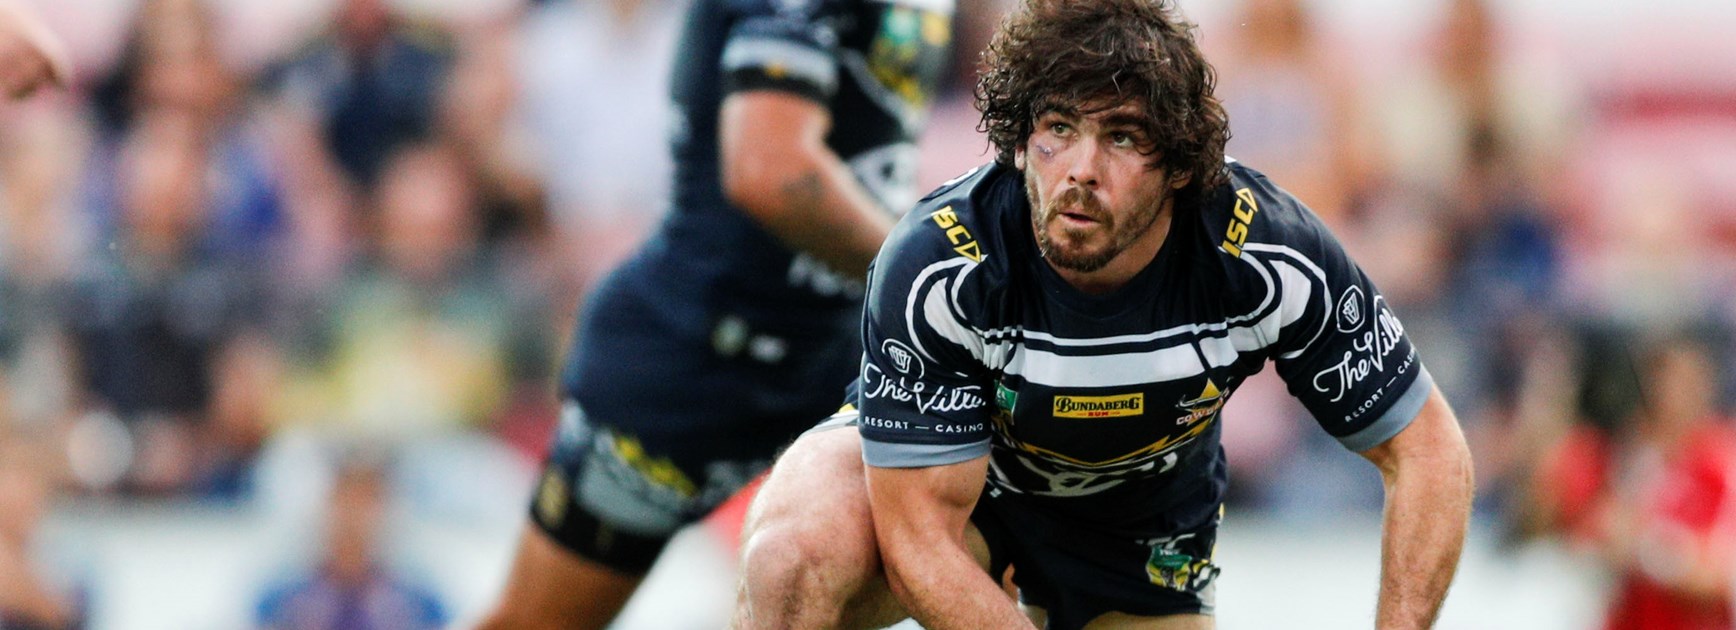 Granville extends stay with Cowboys